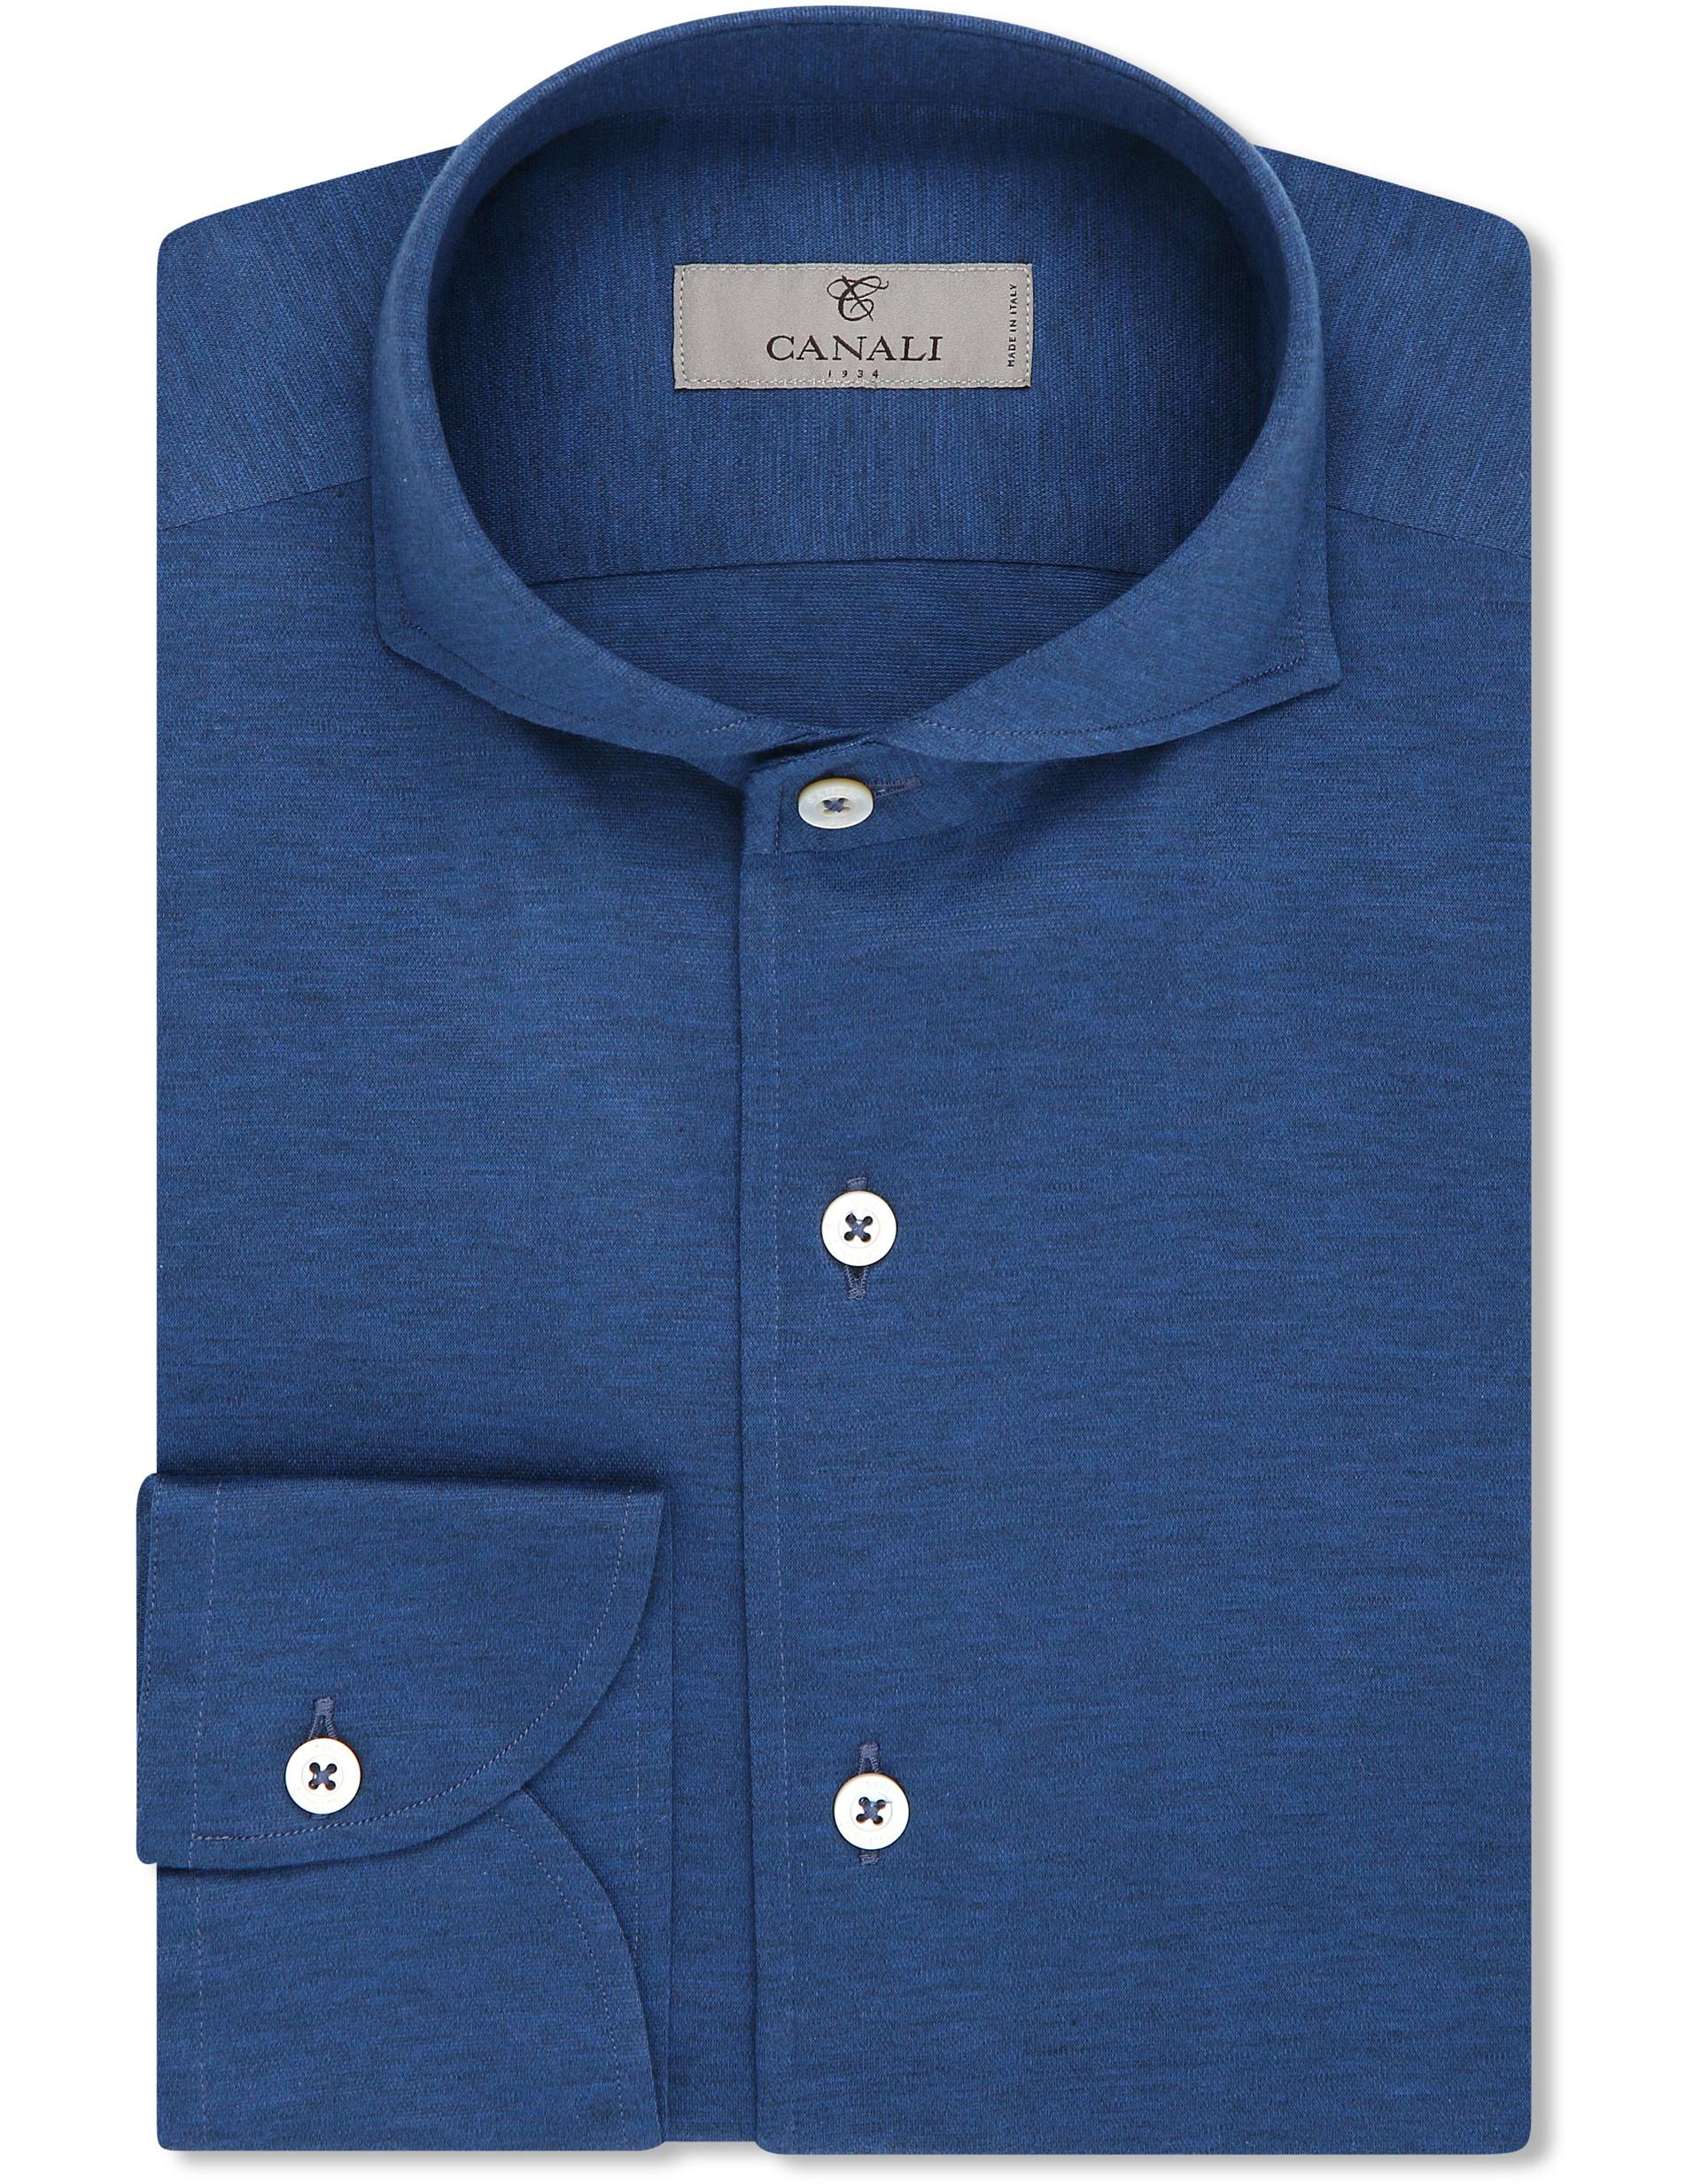 Canali Petrol Blue Cotton Casual Shirt in Blue for Men - Lyst